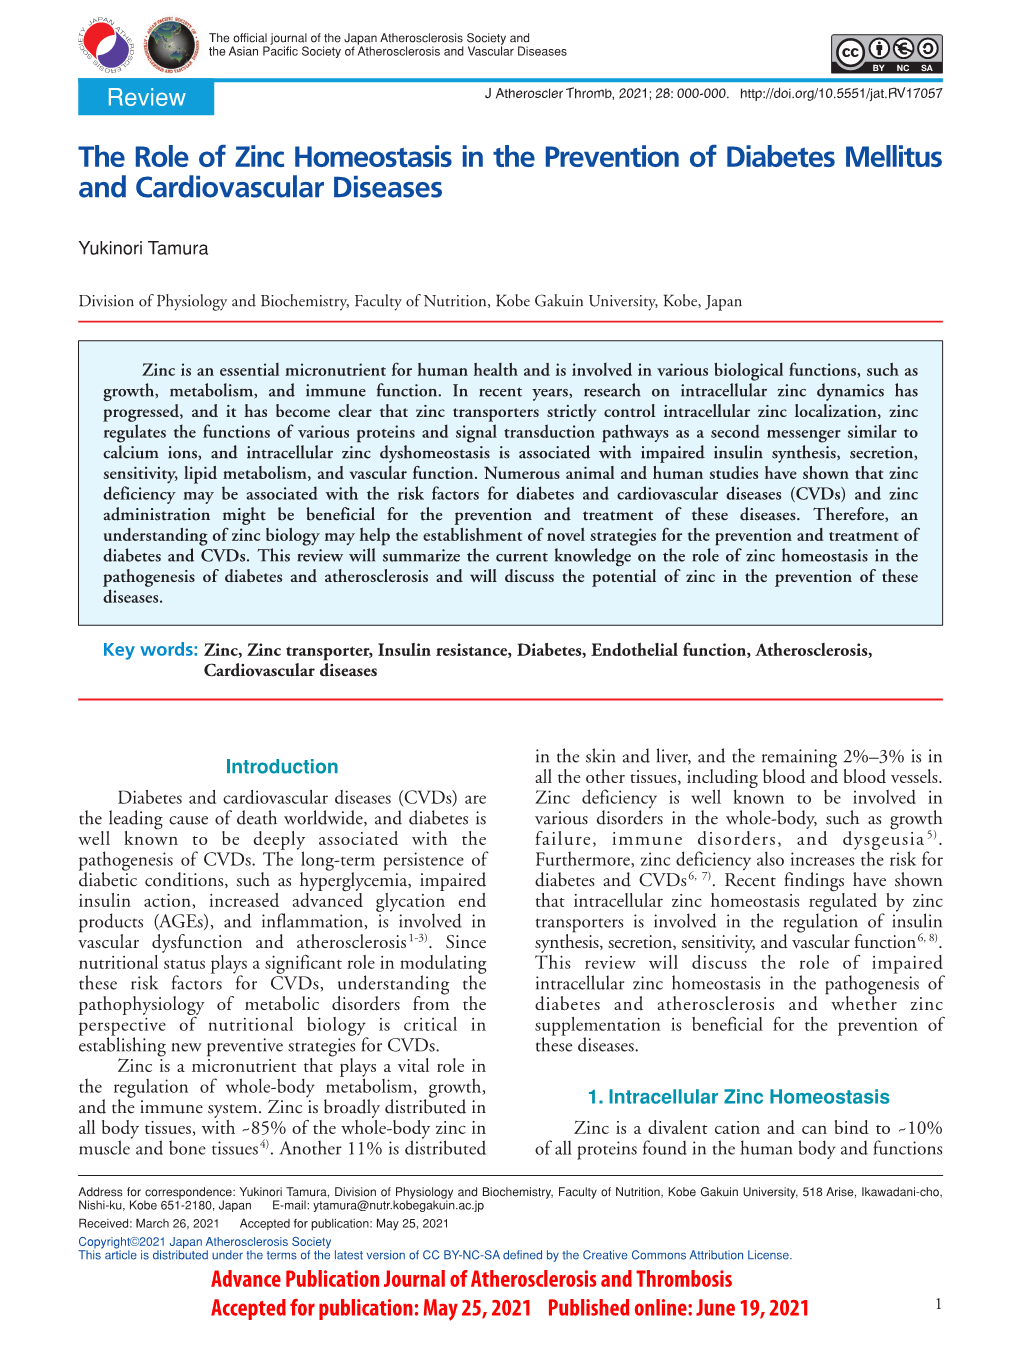 The Role of Zinc Homeostasis in the Prevention of Diabetes Mellitus and Cardiovascular Diseases